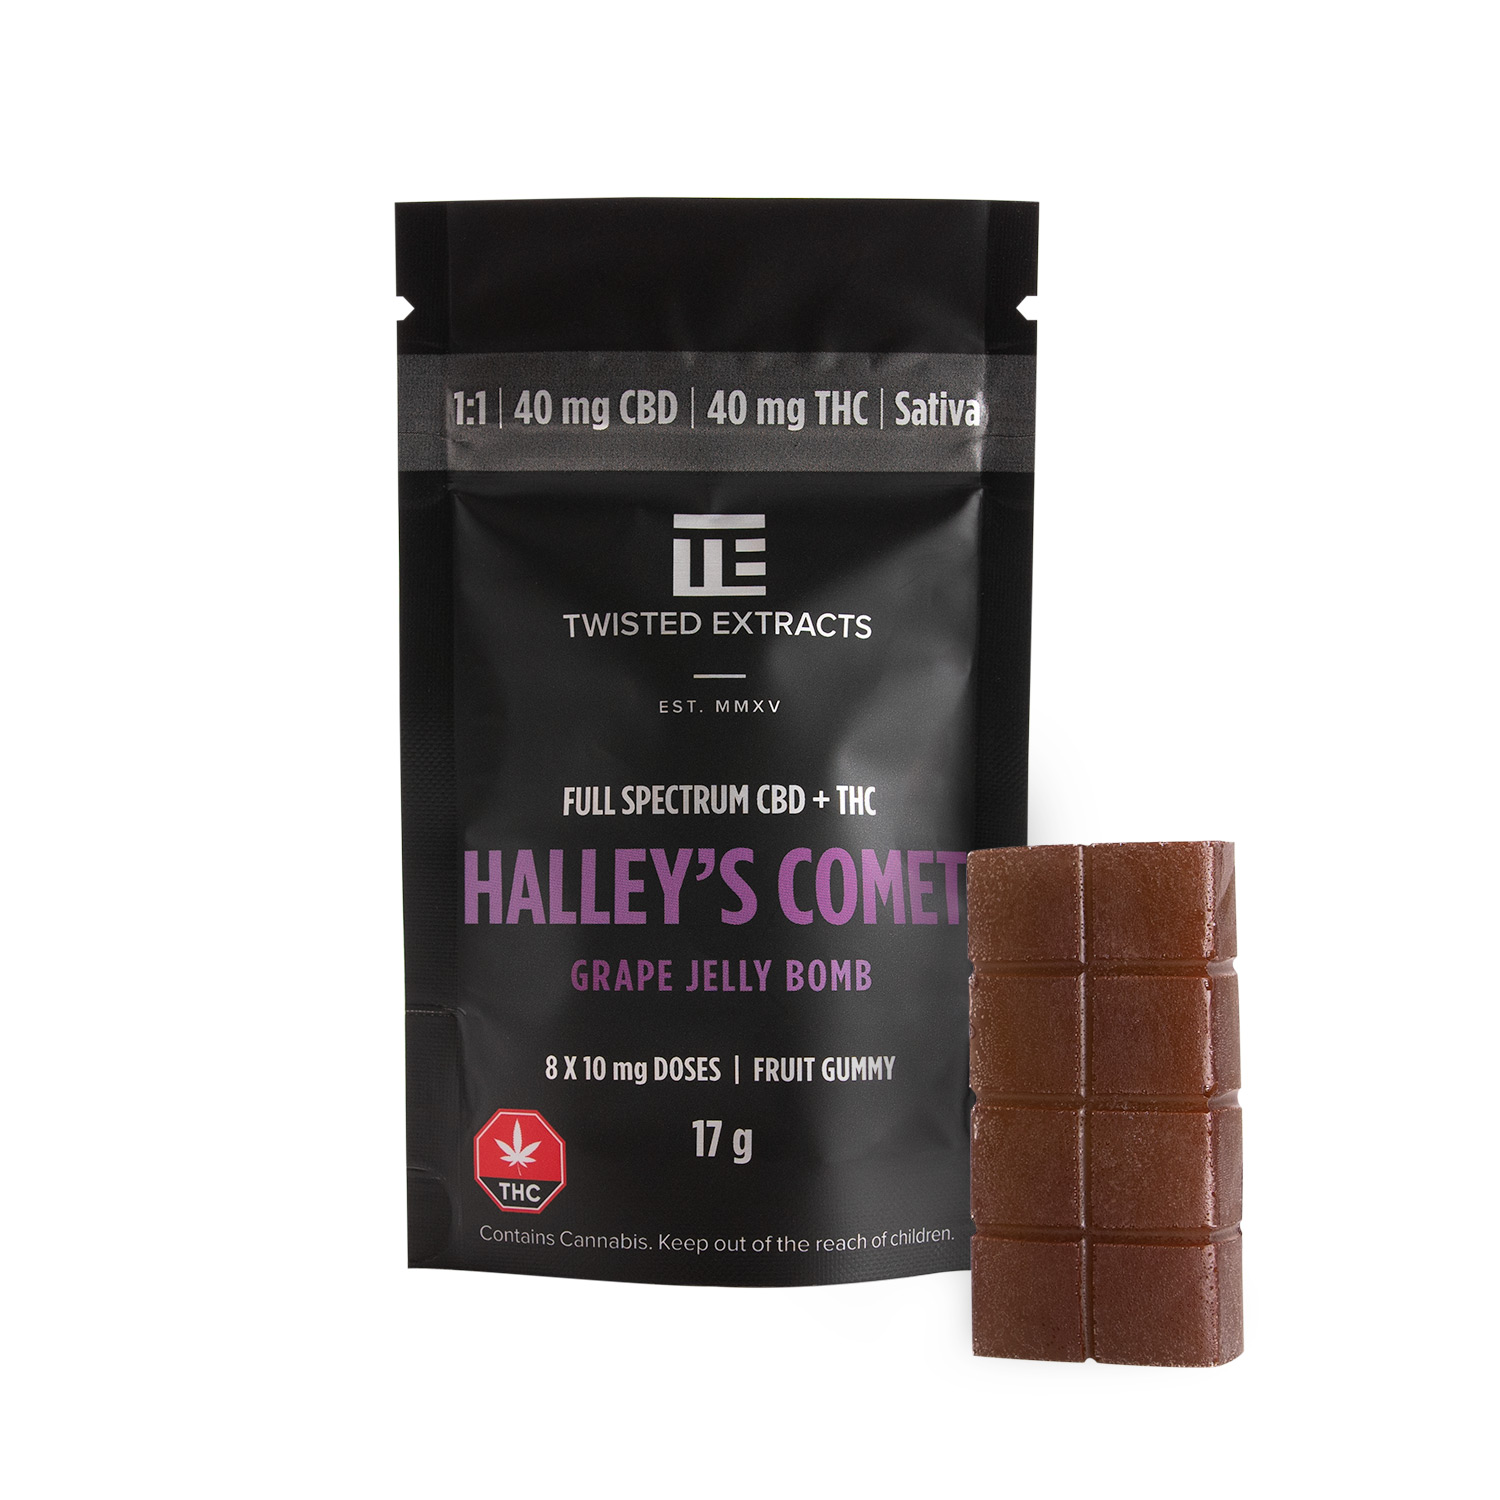 Twisted Extracts Halley's Comet 1:1 Jelly Bomb Grape - 40mg THC + 40mg CBD | Buy Edibles Online | Dispensary Near Me